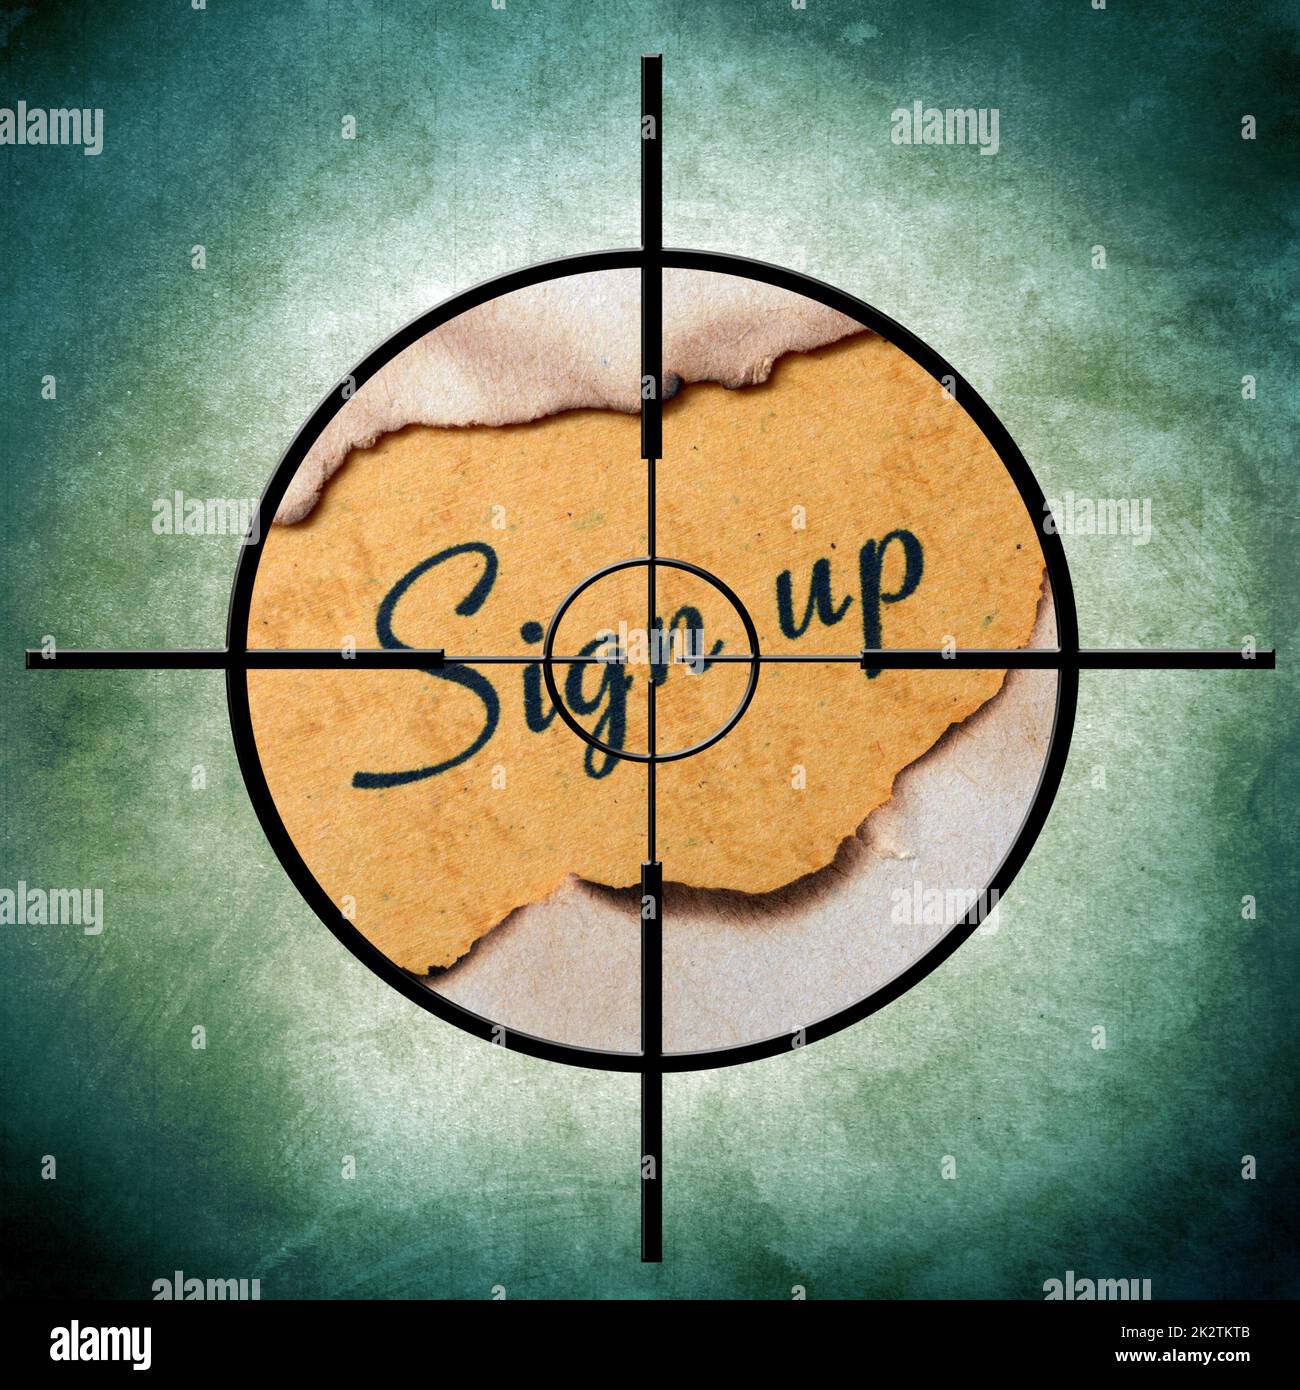 Sign up text on target Stock Photo